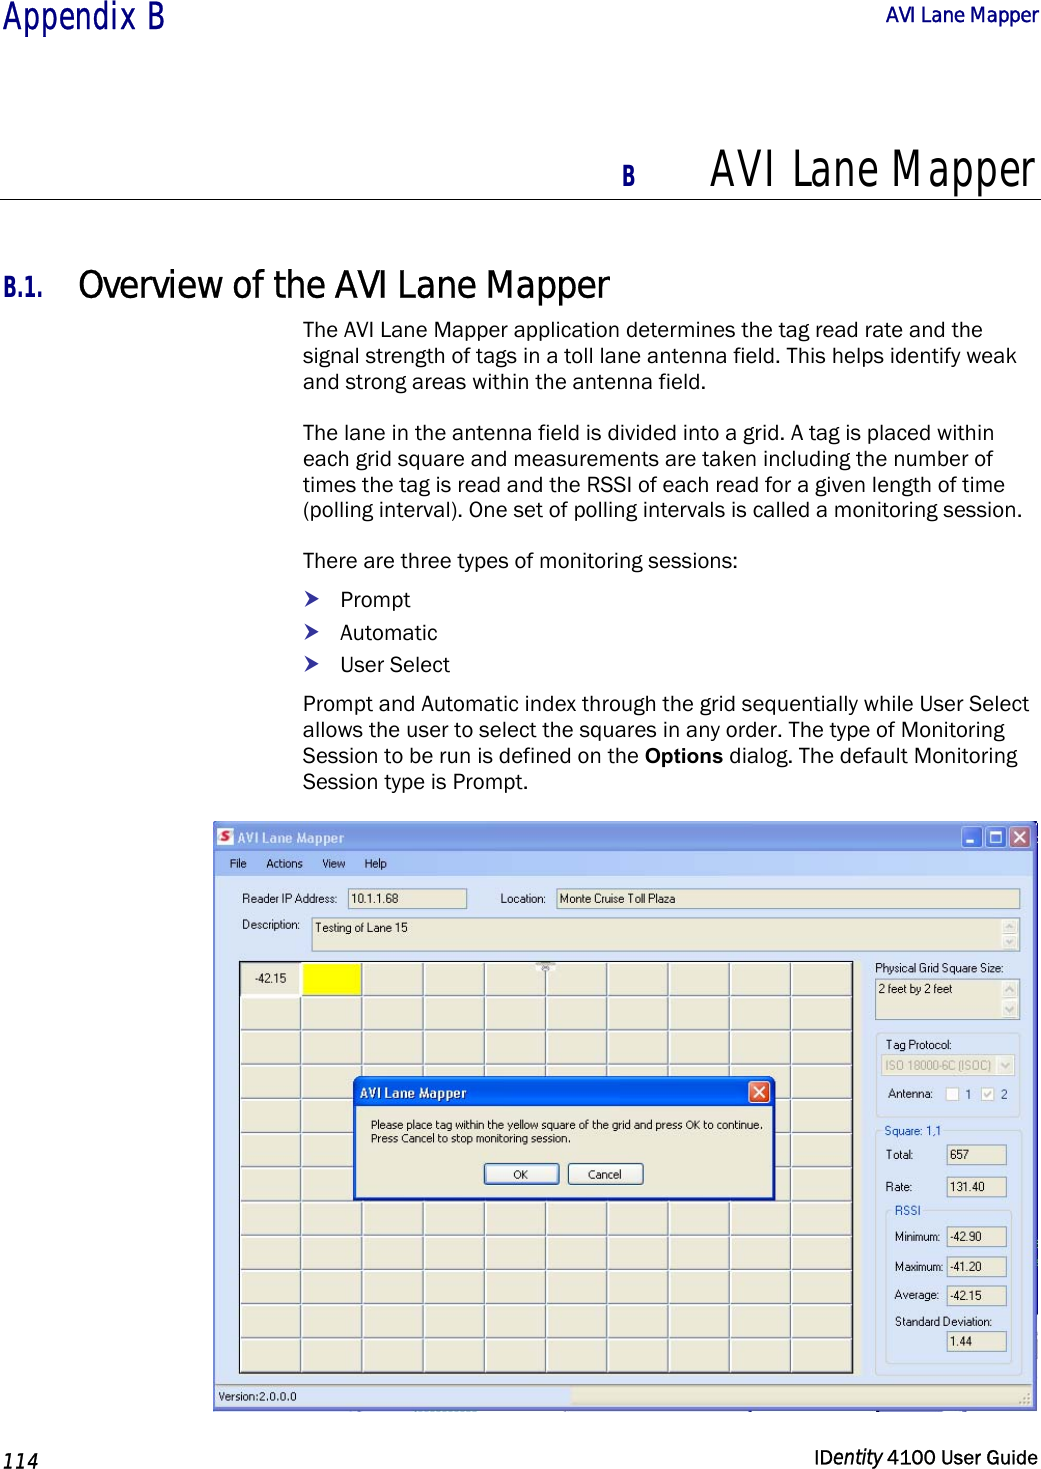  Appendix B  AVI Lane Mapper   114  IDentity 4100 User Guide  B AVI Lane Mapper  B.1. Overview of the AVI Lane Mapper The AVI Lane Mapper application determines the tag read rate and the signal strength of tags in a toll lane antenna field. This helps identify weak and strong areas within the antenna field. The lane in the antenna field is divided into a grid. A tag is placed within each grid square and measurements are taken including the number of times the tag is read and the RSSI of each read for a given length of time (polling interval). One set of polling intervals is called a monitoring session.  There are three types of monitoring sessions: h Prompt h Automatic h User Select Prompt and Automatic index through the grid sequentially while User Select allows the user to select the squares in any order. The type of Monitoring Session to be run is defined on the Options dialog. The default Monitoring Session type is Prompt.  